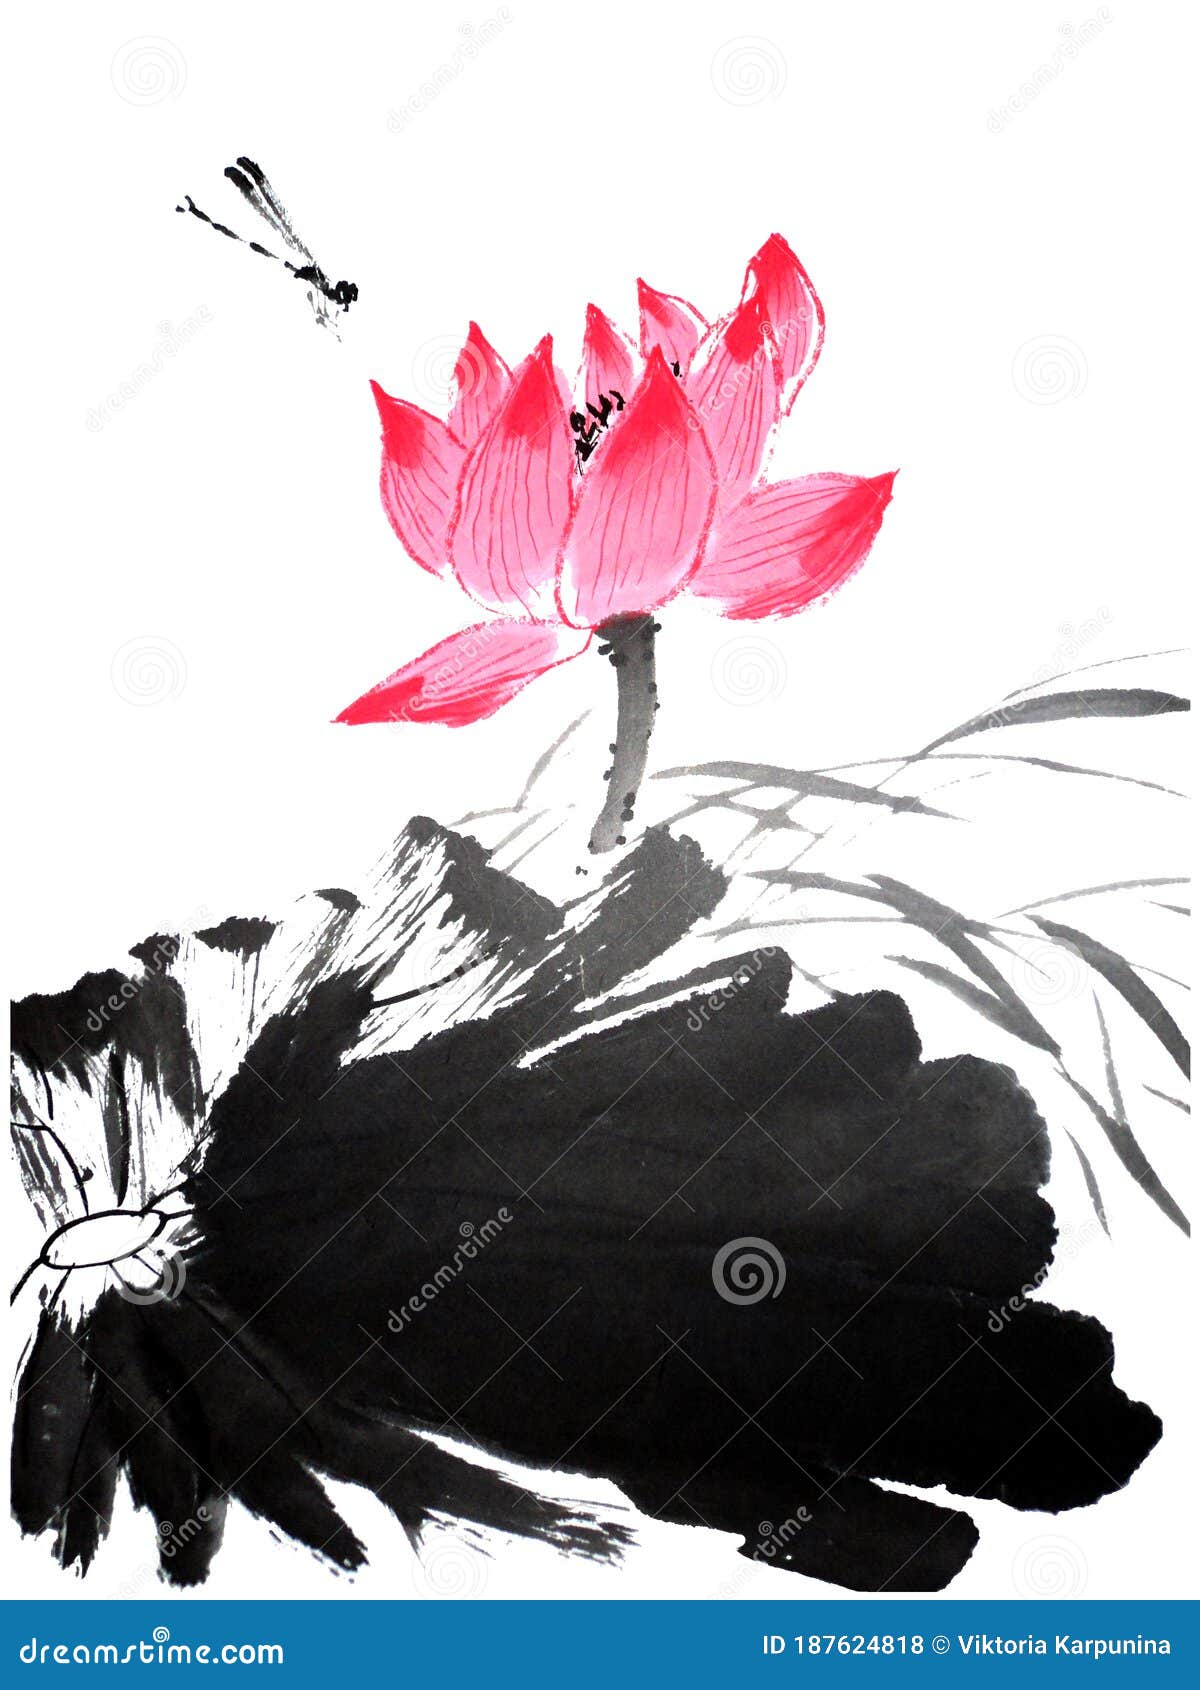 Details about   Artwork Lotus dragonfly Hand Painted Chinese Brush watercolor painting Wall Art 